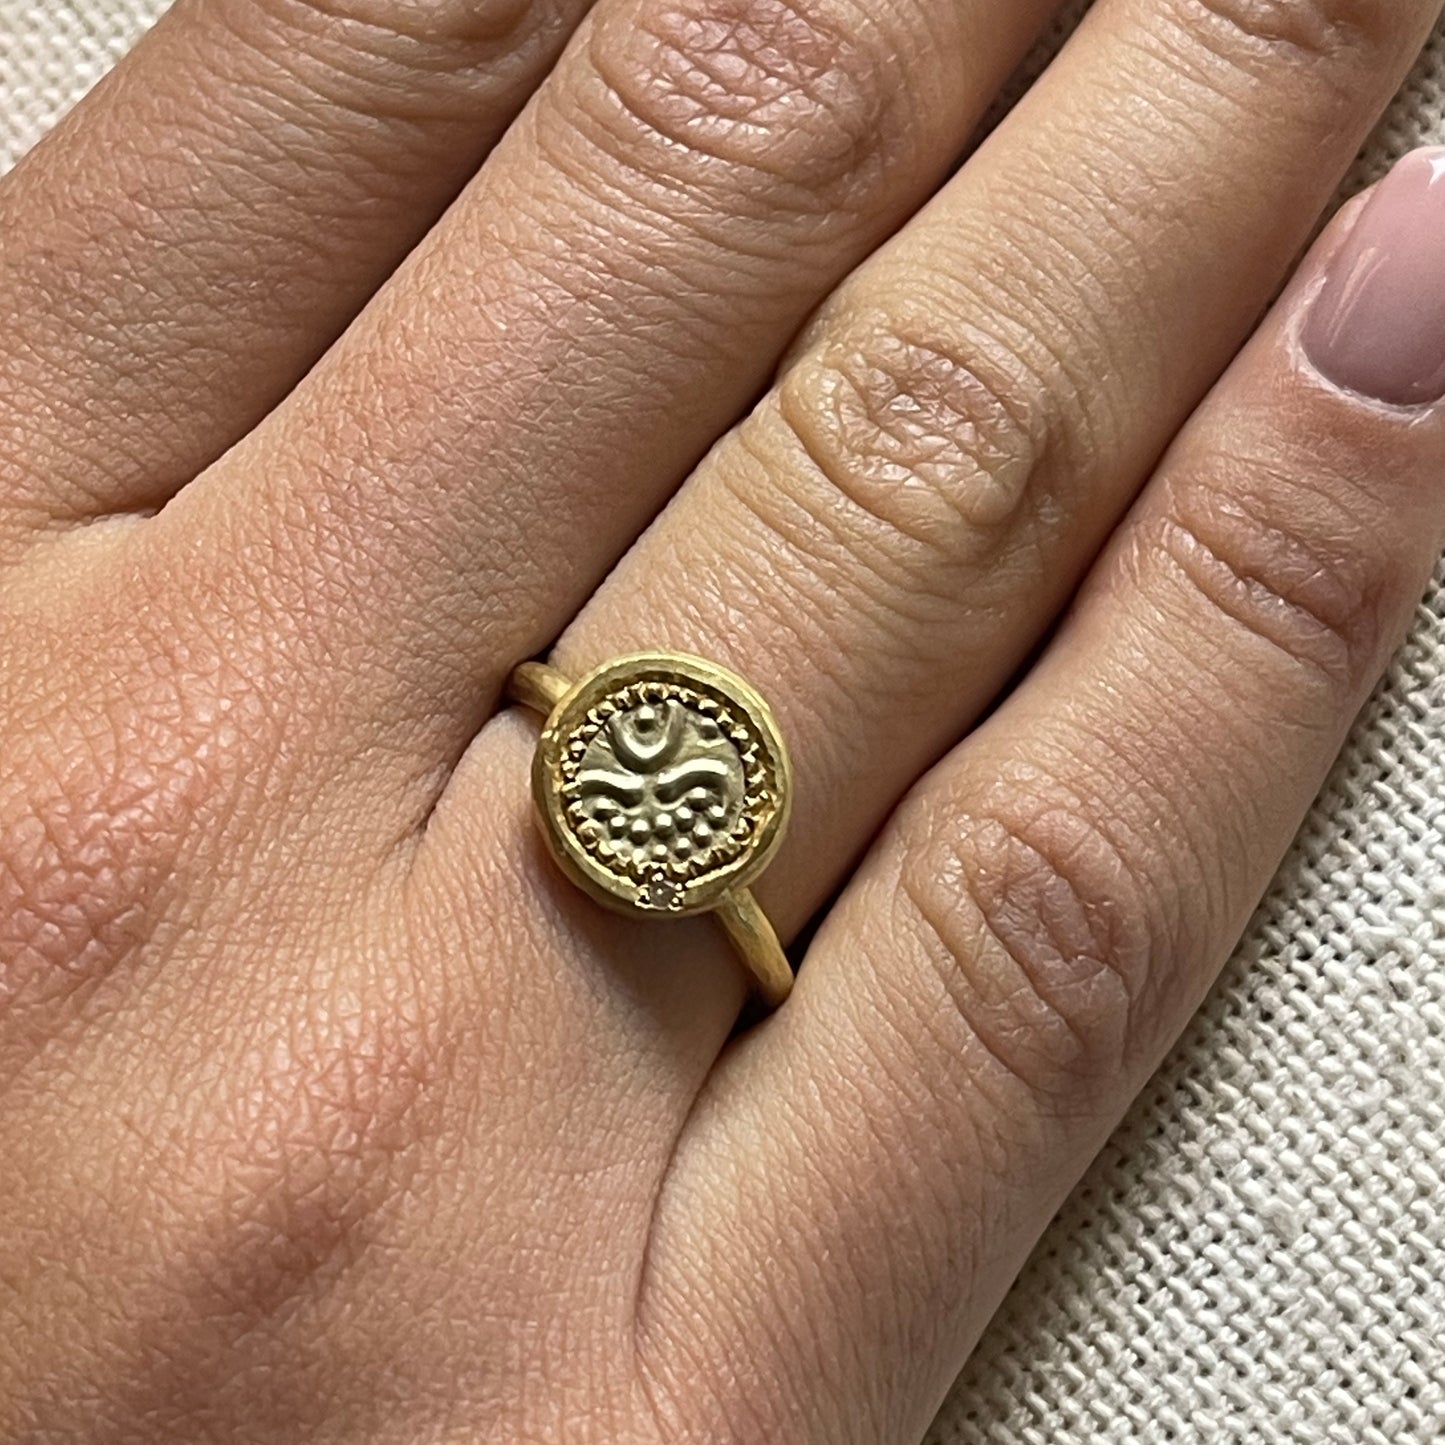 Antique gold coin ring